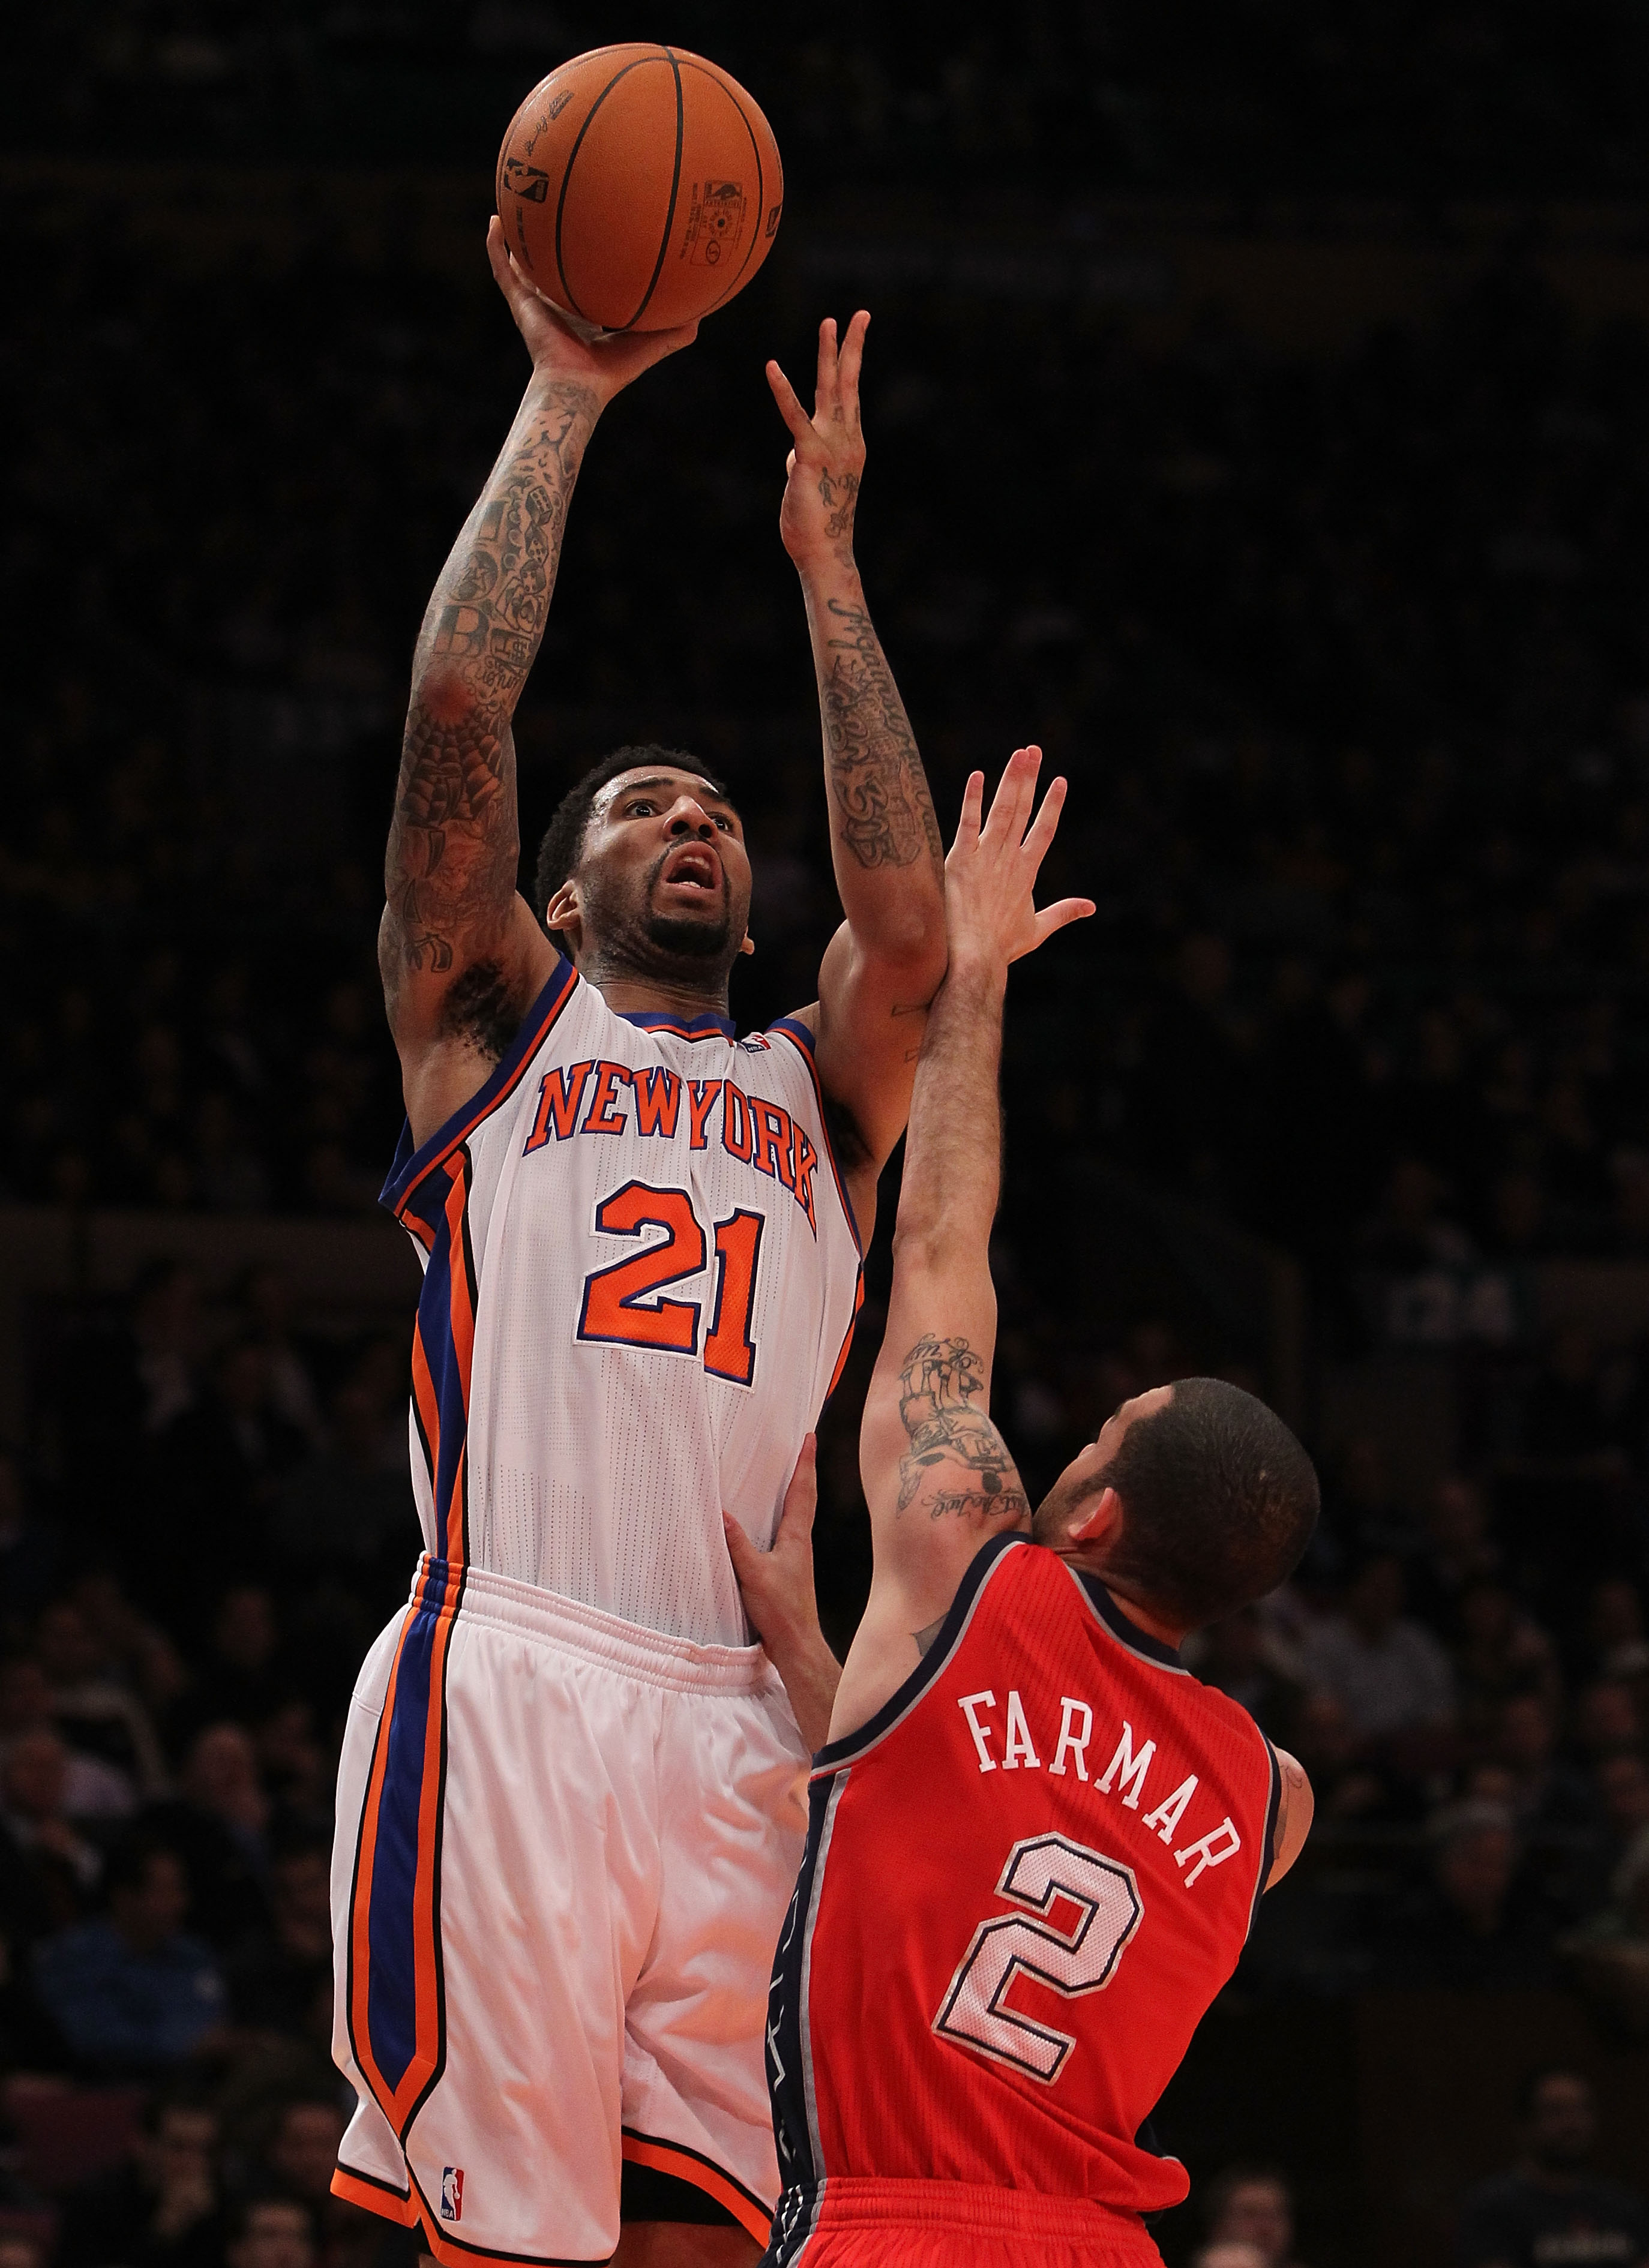 NEW YORK, NY - NOVEMBER 30:  Wilson Chandler #21 of the New York Knicks shoots the ball over Jordan Farmer #2 of the New Jersey Nets on November 30, 2010 at Madison Square Garden in New York City. NOTE TO USER: User expressly acknowledges and agrees that,